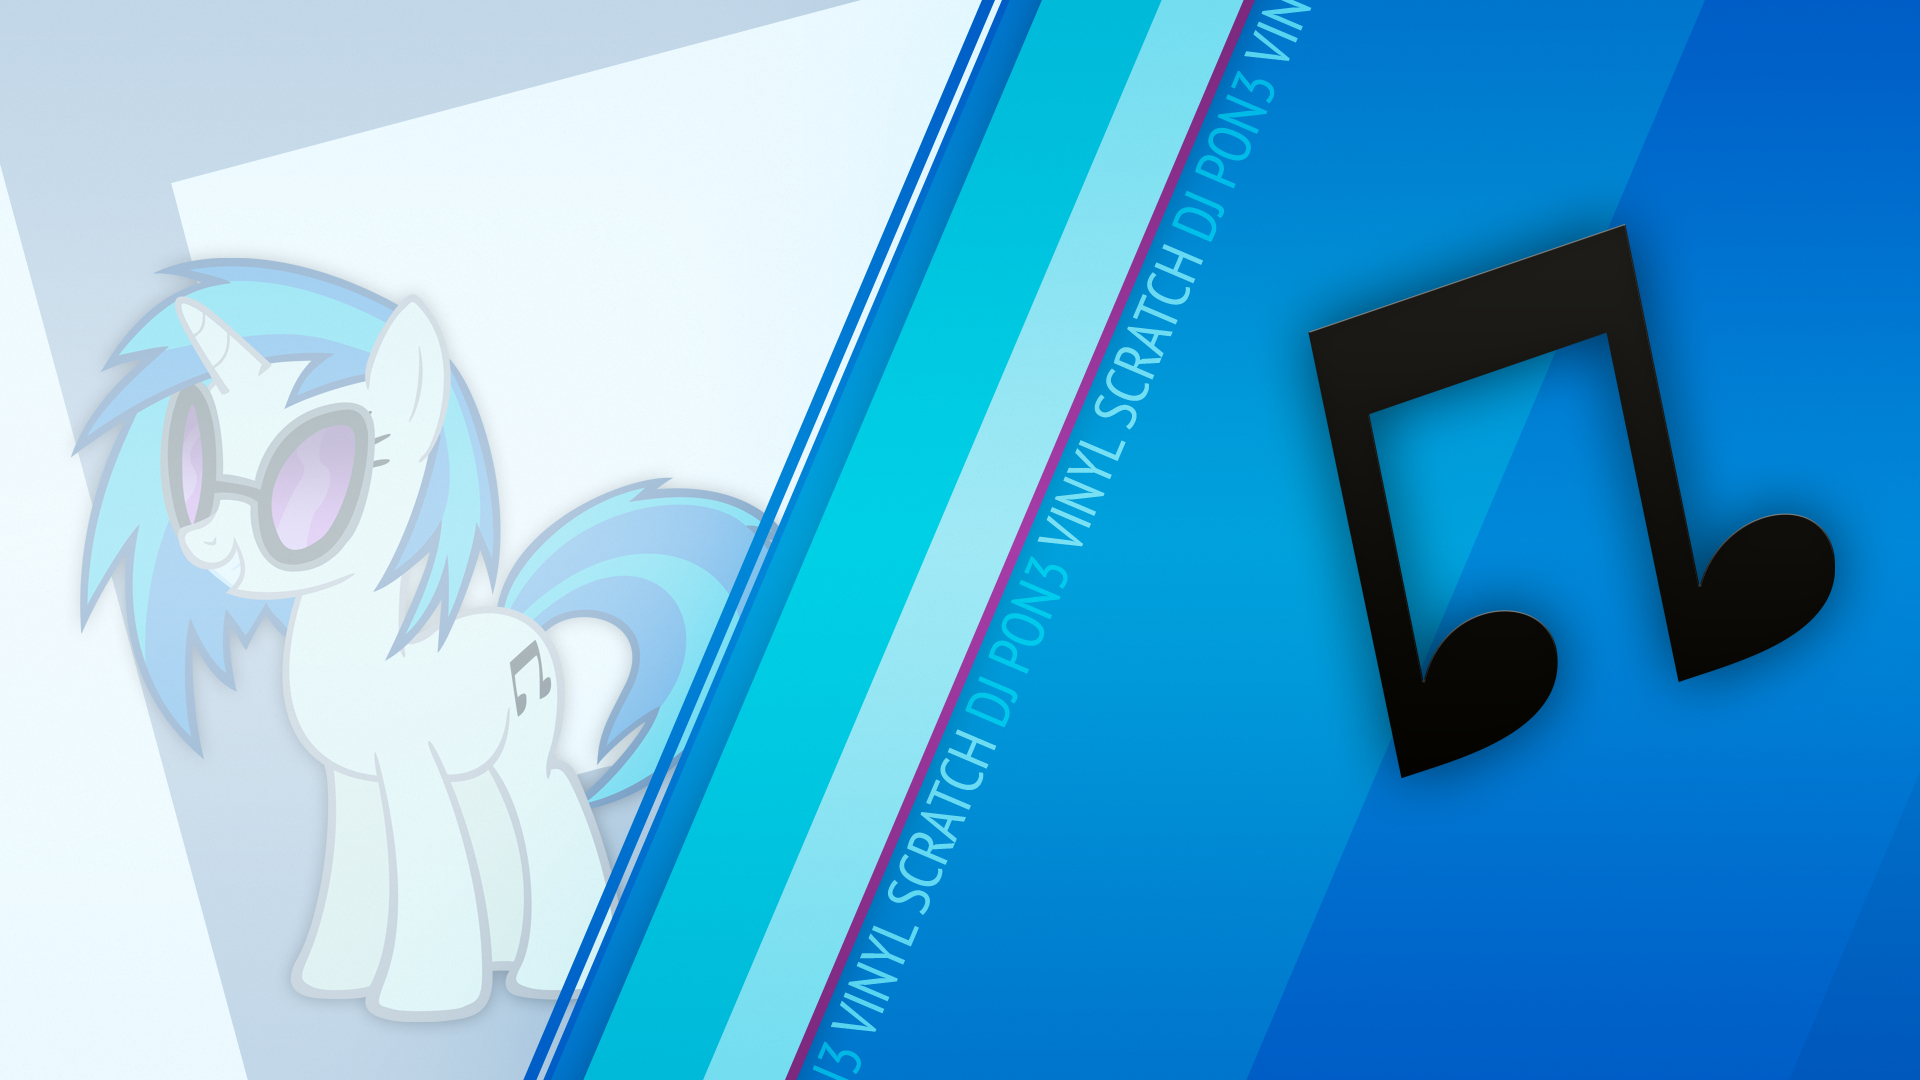 Vinyl Scratch CM Wallpaper by Bardiel83, OfPut and The-Smiling-Pony